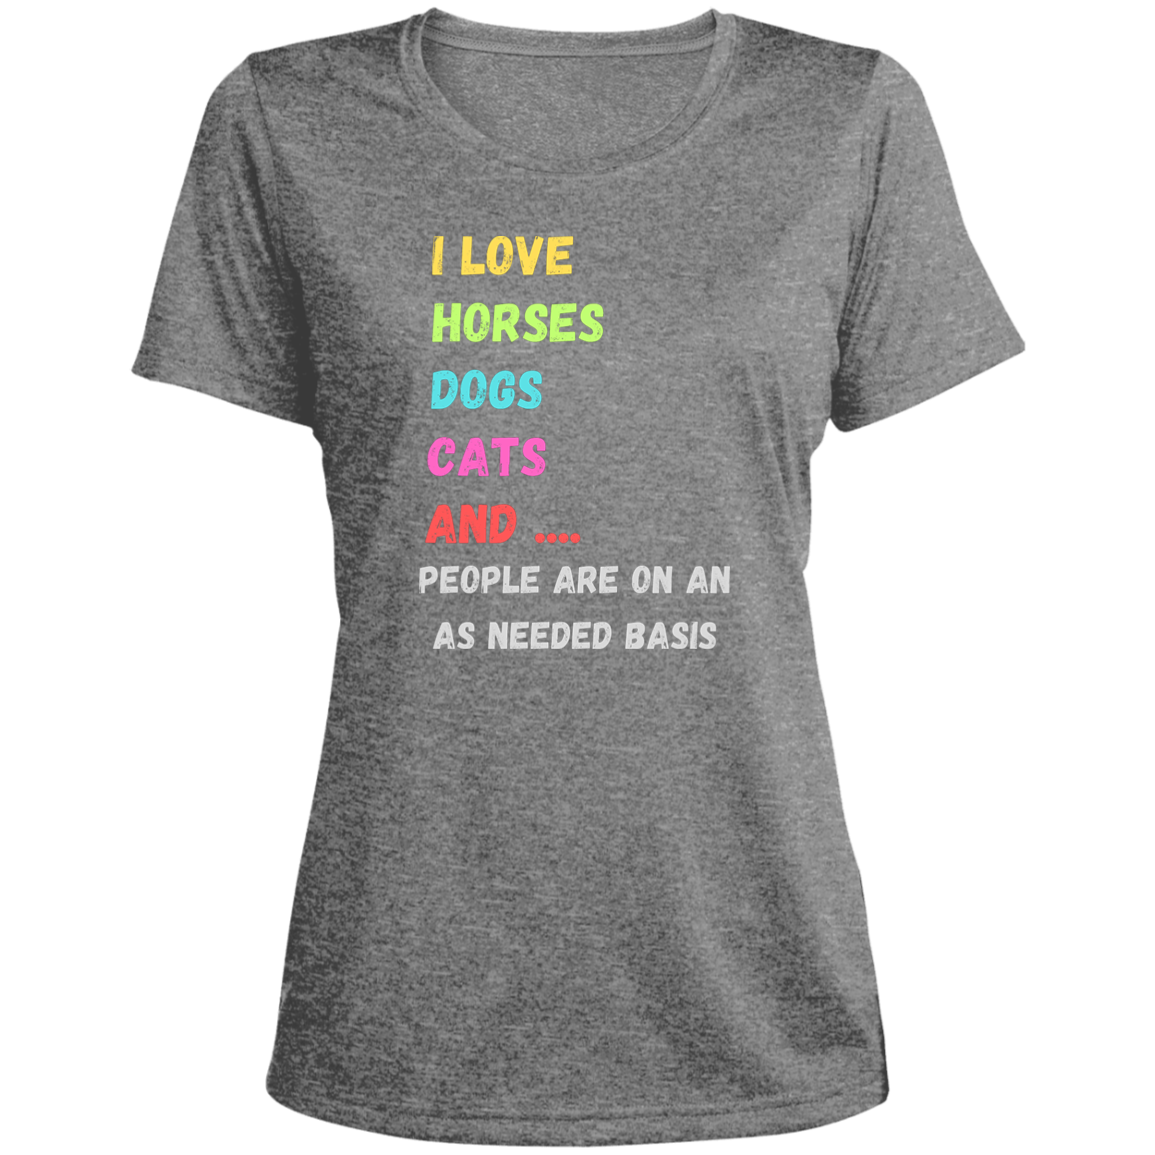 People Are Questionable Women's T-Shirt - MyAllOutHorses